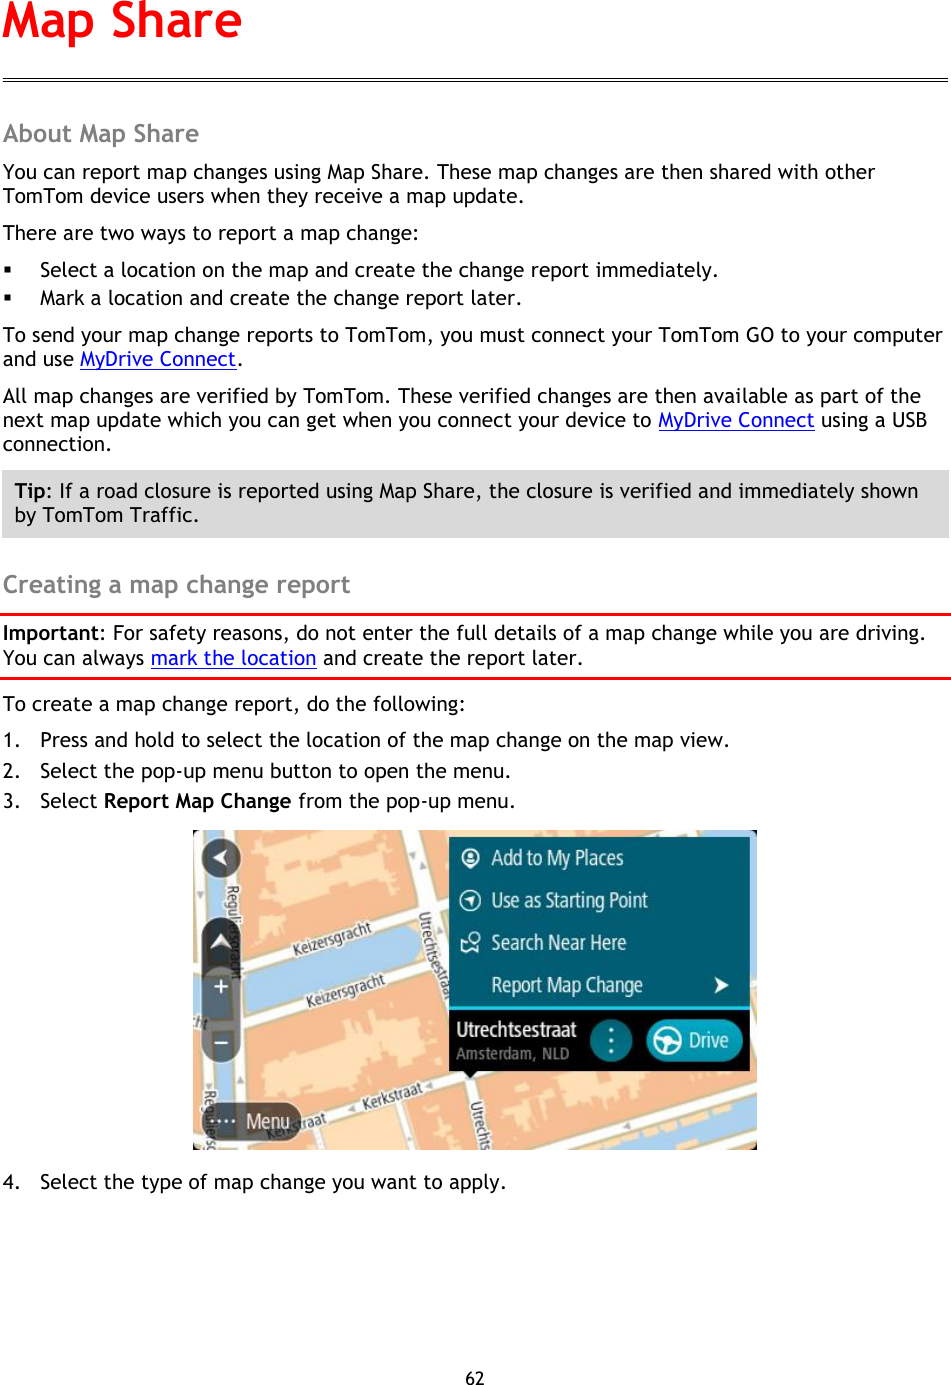 62    About Map Share You can report map changes using Map Share. These map changes are then shared with other TomTom device users when they receive a map update. There are two ways to report a map change:  Select a location on the map and create the change report immediately.  Mark a location and create the change report later. To send your map change reports to TomTom, you must connect your TomTom GO to your computer and use MyDrive Connect. All map changes are verified by TomTom. These verified changes are then available as part of the next map update which you can get when you connect your device to MyDrive Connect using a USB connection. Tip: If a road closure is reported using Map Share, the closure is verified and immediately shown by TomTom Traffic.  Creating a map change report Important: For safety reasons, do not enter the full details of a map change while you are driving. You can always mark the location and create the report later. To create a map change report, do the following: 1. Press and hold to select the location of the map change on the map view. 2. Select the pop-up menu button to open the menu. 3. Select Report Map Change from the pop-up menu.  4. Select the type of map change you want to apply. Map Share 